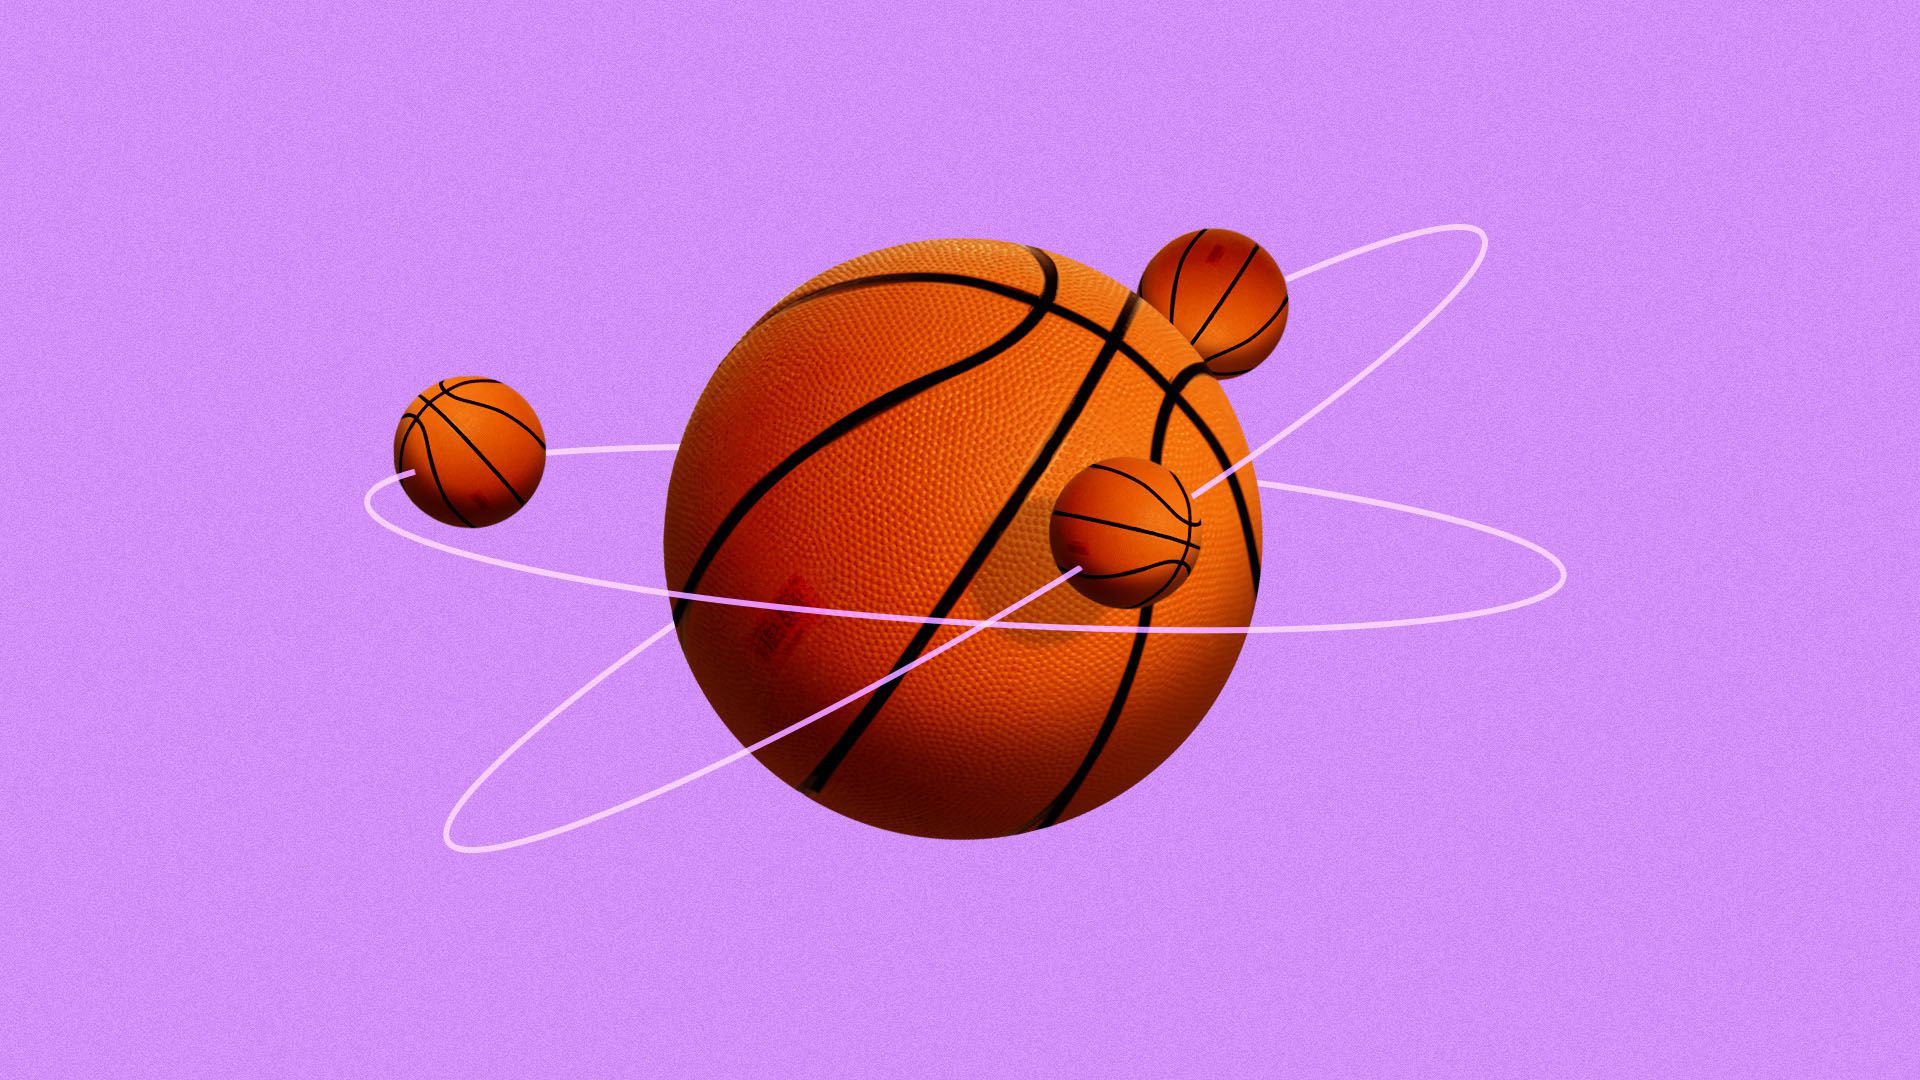 Illustration of a basketball as an atom will little electron basketballs